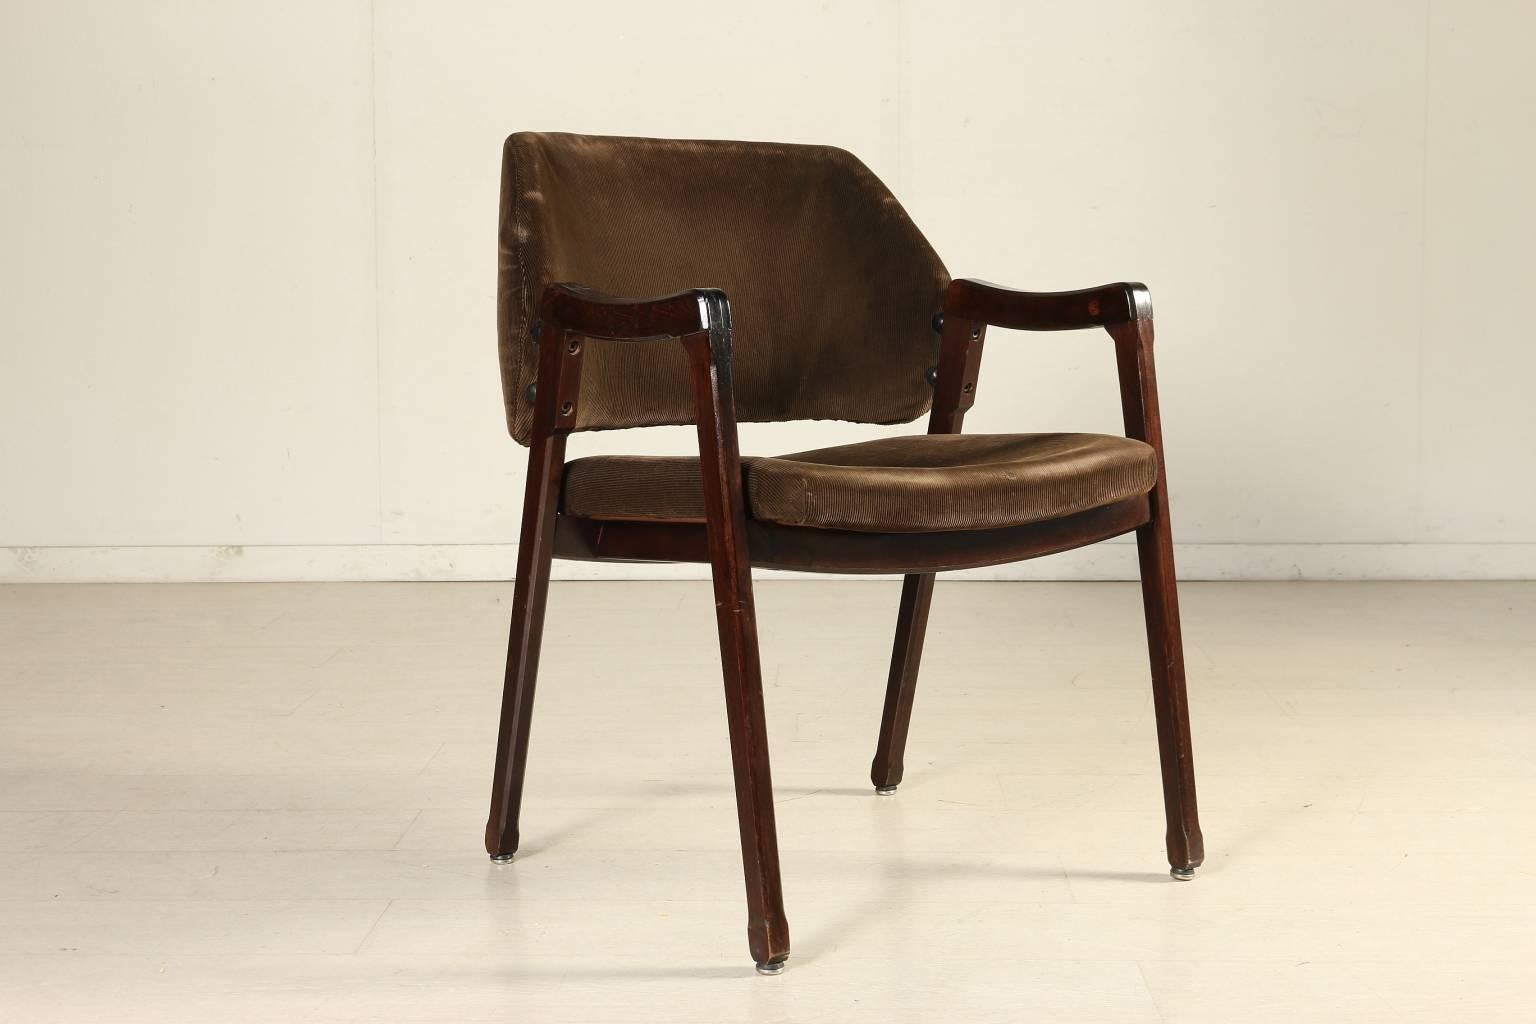 A chair designed by Ico Parisi for Cassina, model 814. Rosewood, foam padding, velvet upholstery. Manufactured in Italy, 1960s.